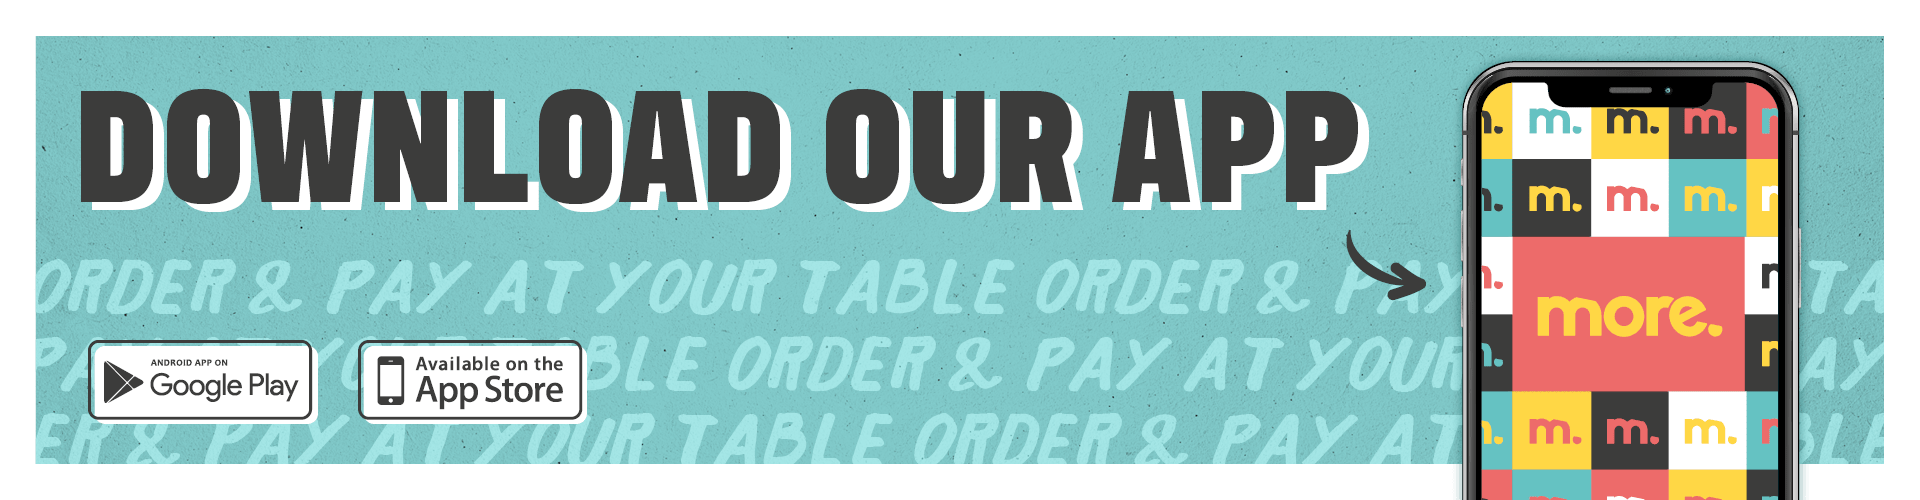 Download our app. Order and pay at your table. More app.